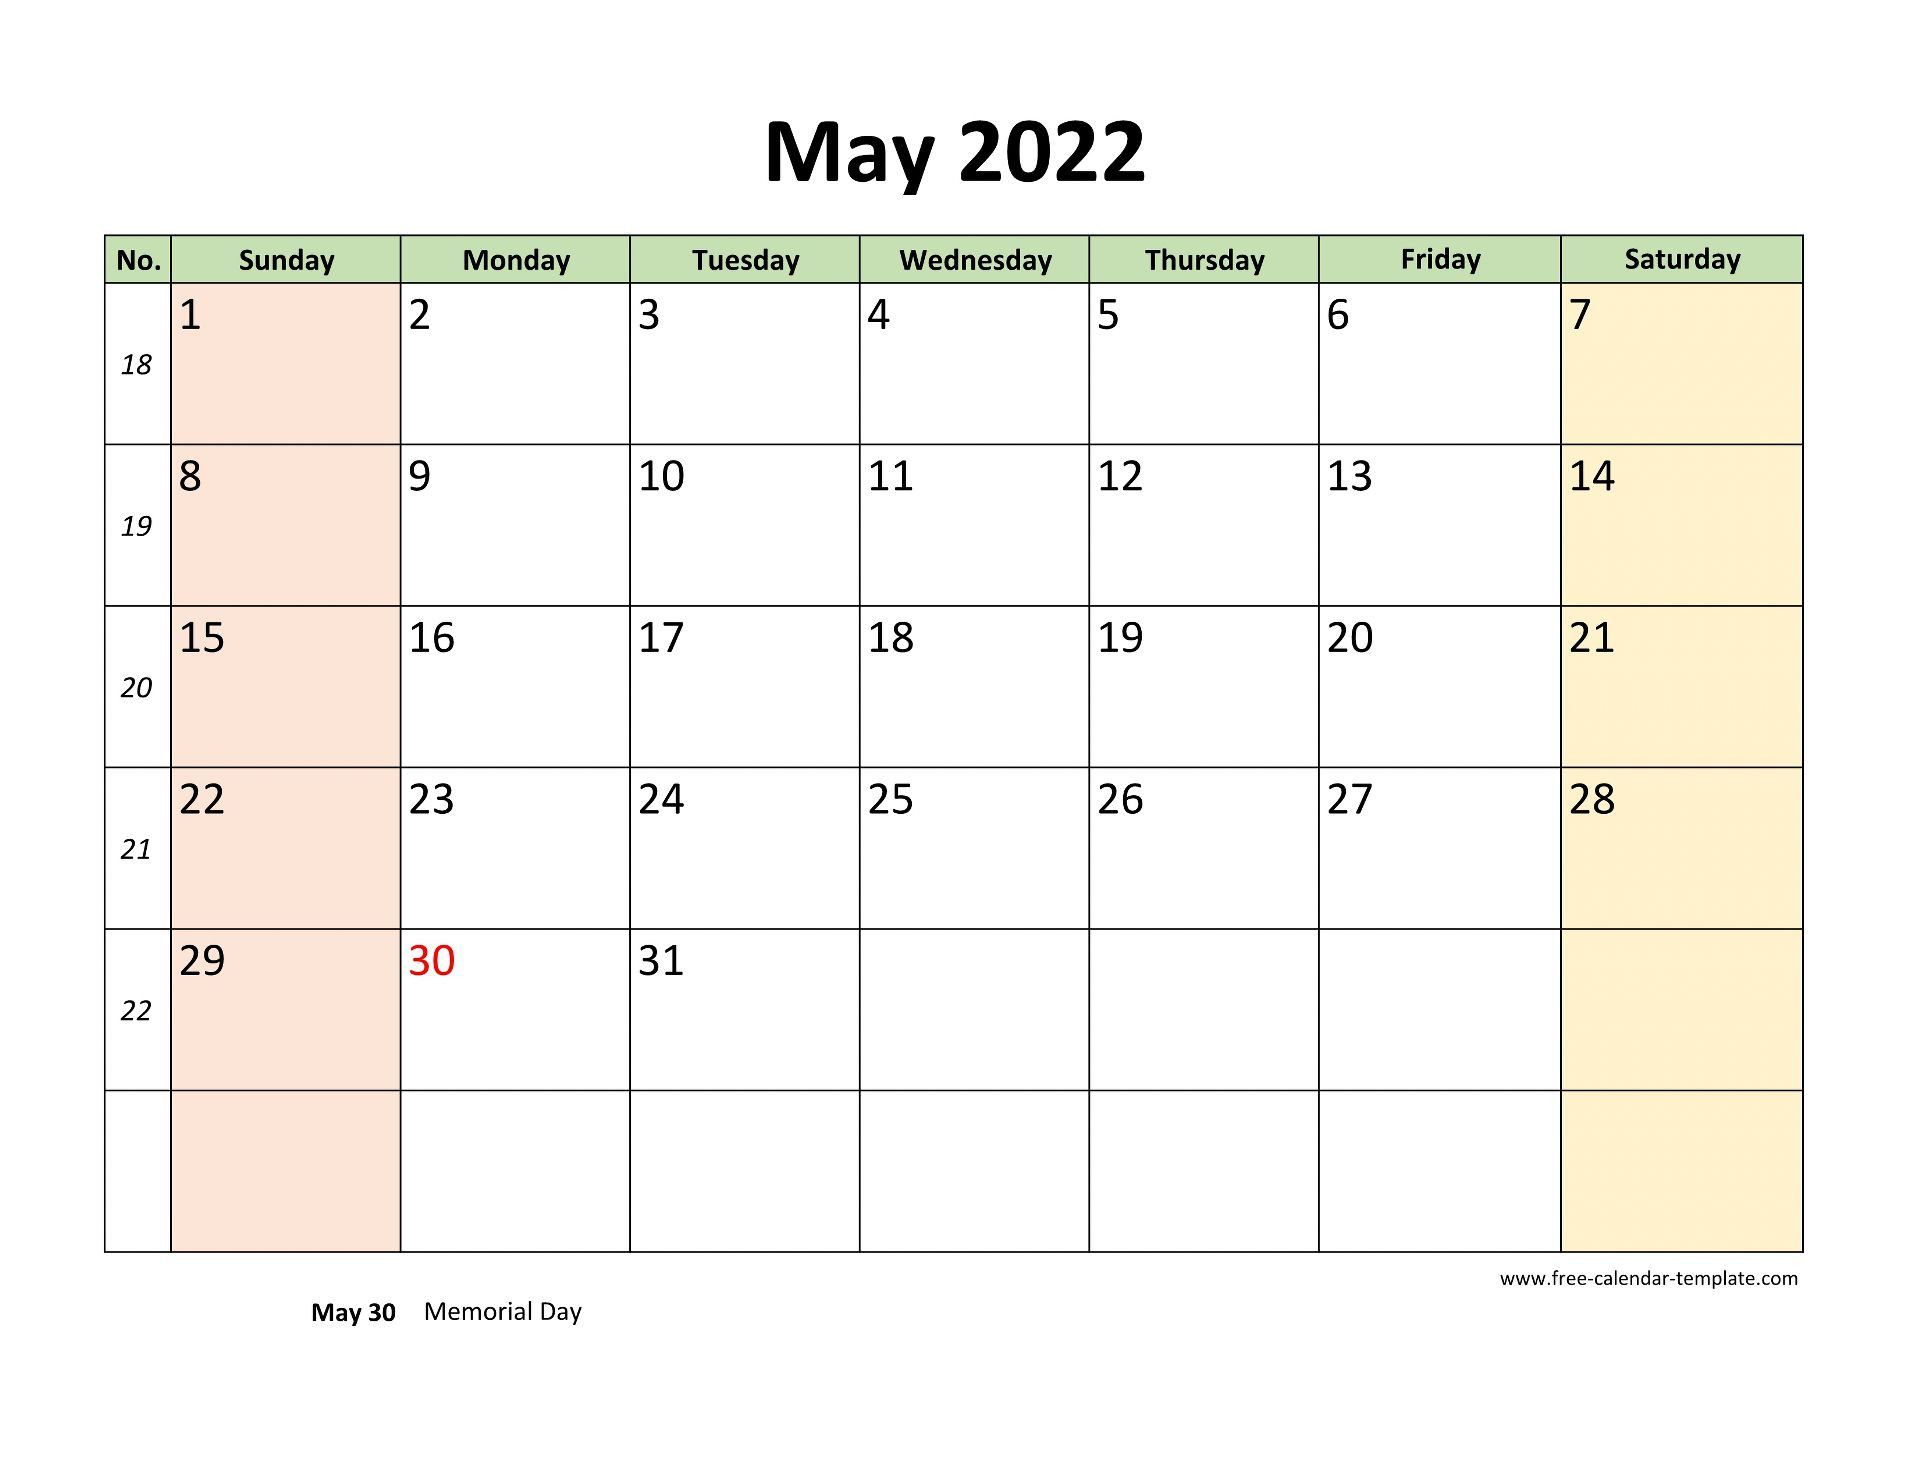 May 2022 Calendar Printable With Coloring On Weekend (Horizontal) | Free-Calendar-Template-2022 Printable Calendar With Notes